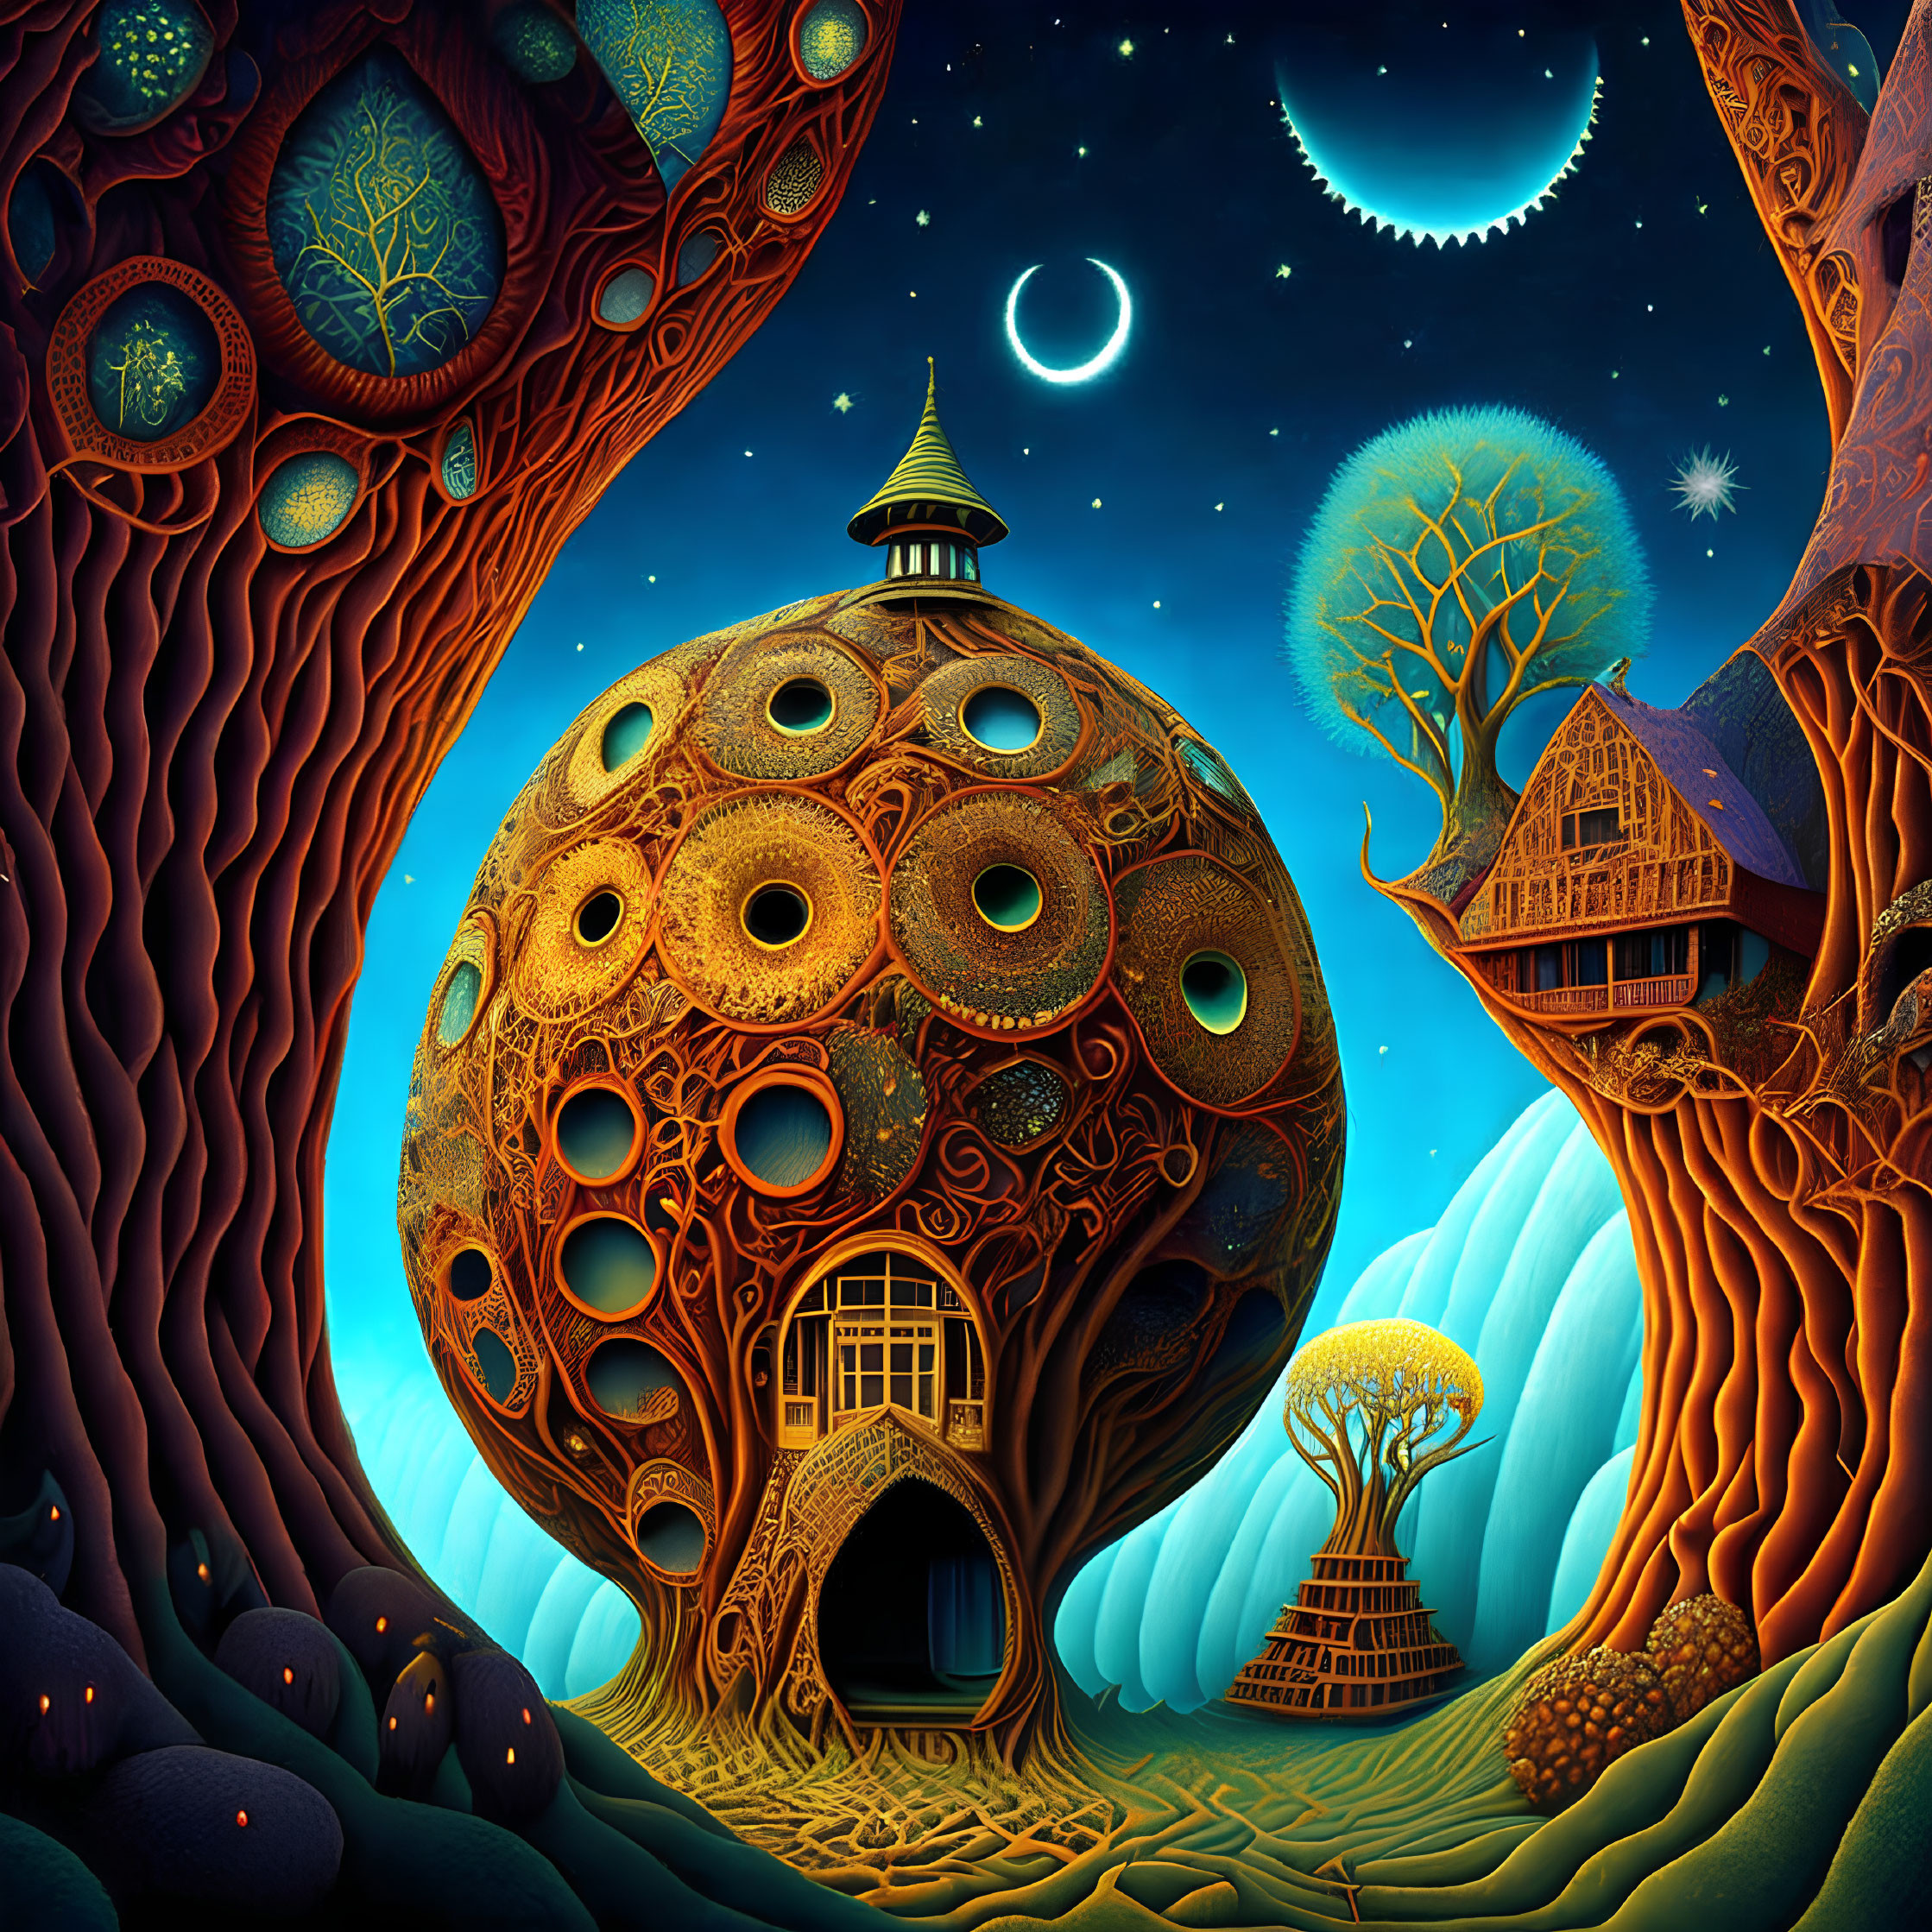 Fantasy landscape with whimsical trees, spherical house, treehouse, moons, stars